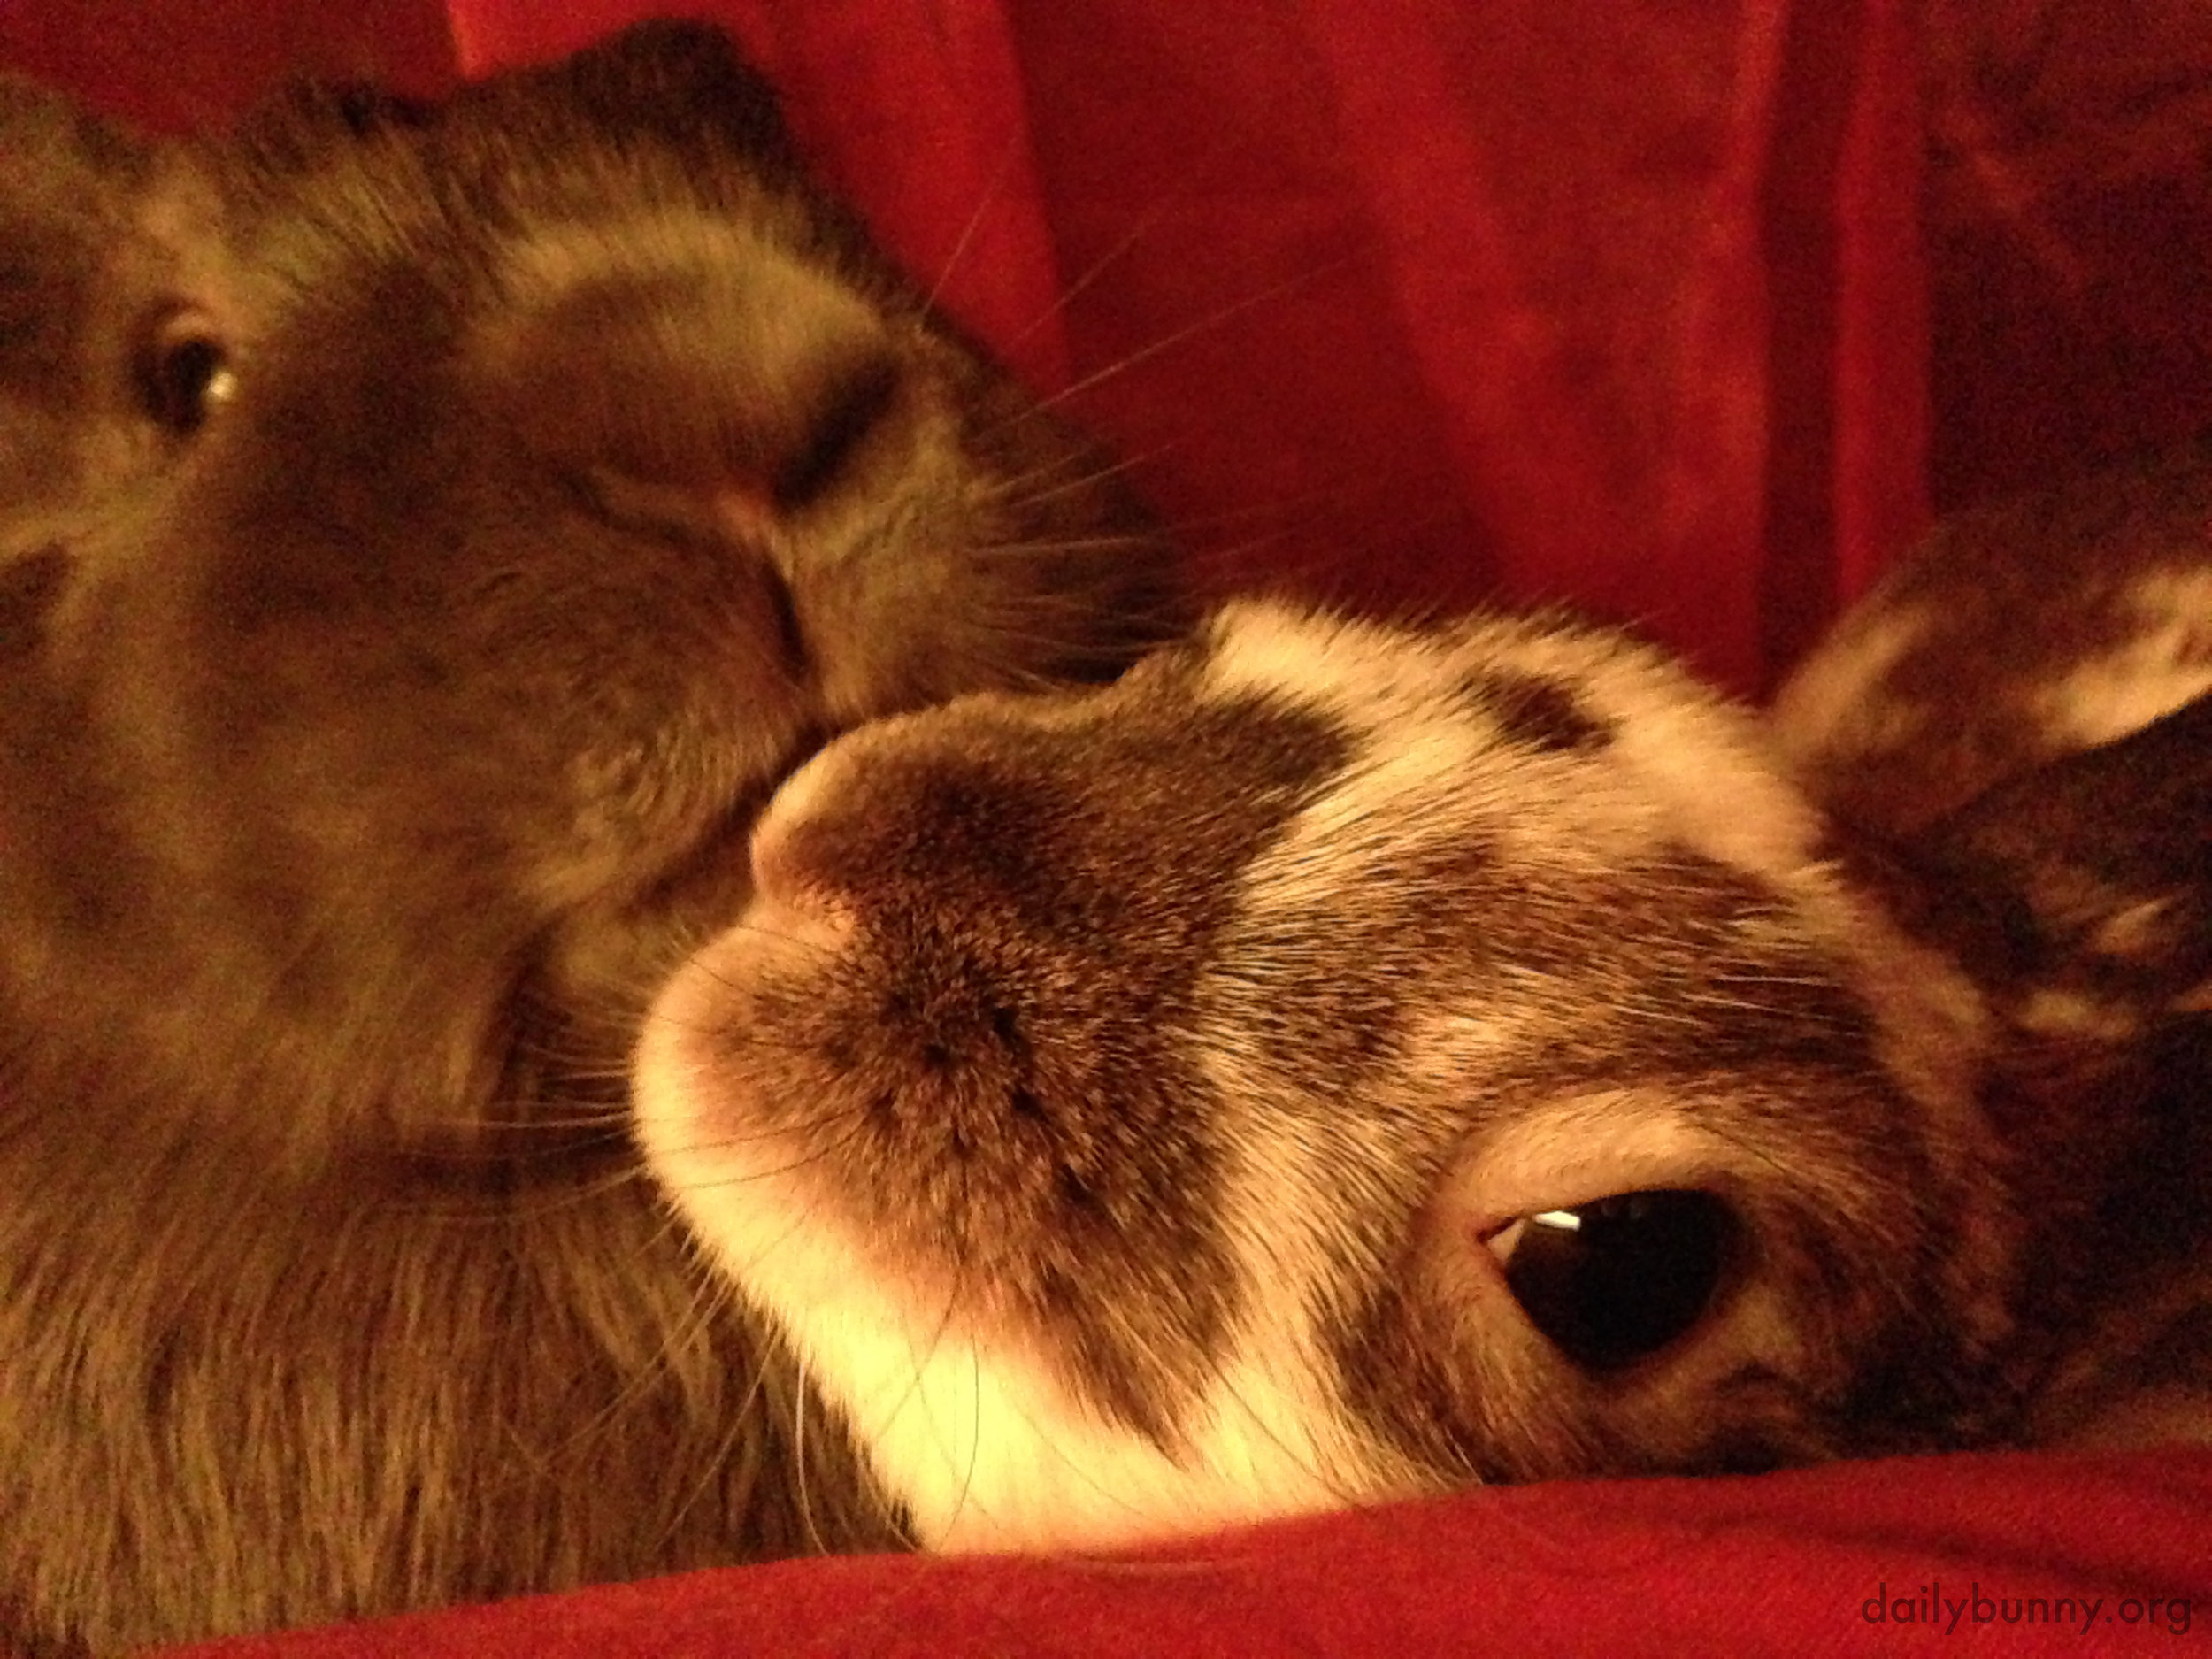 Bunnies Have a Quick Kiss for the Camera